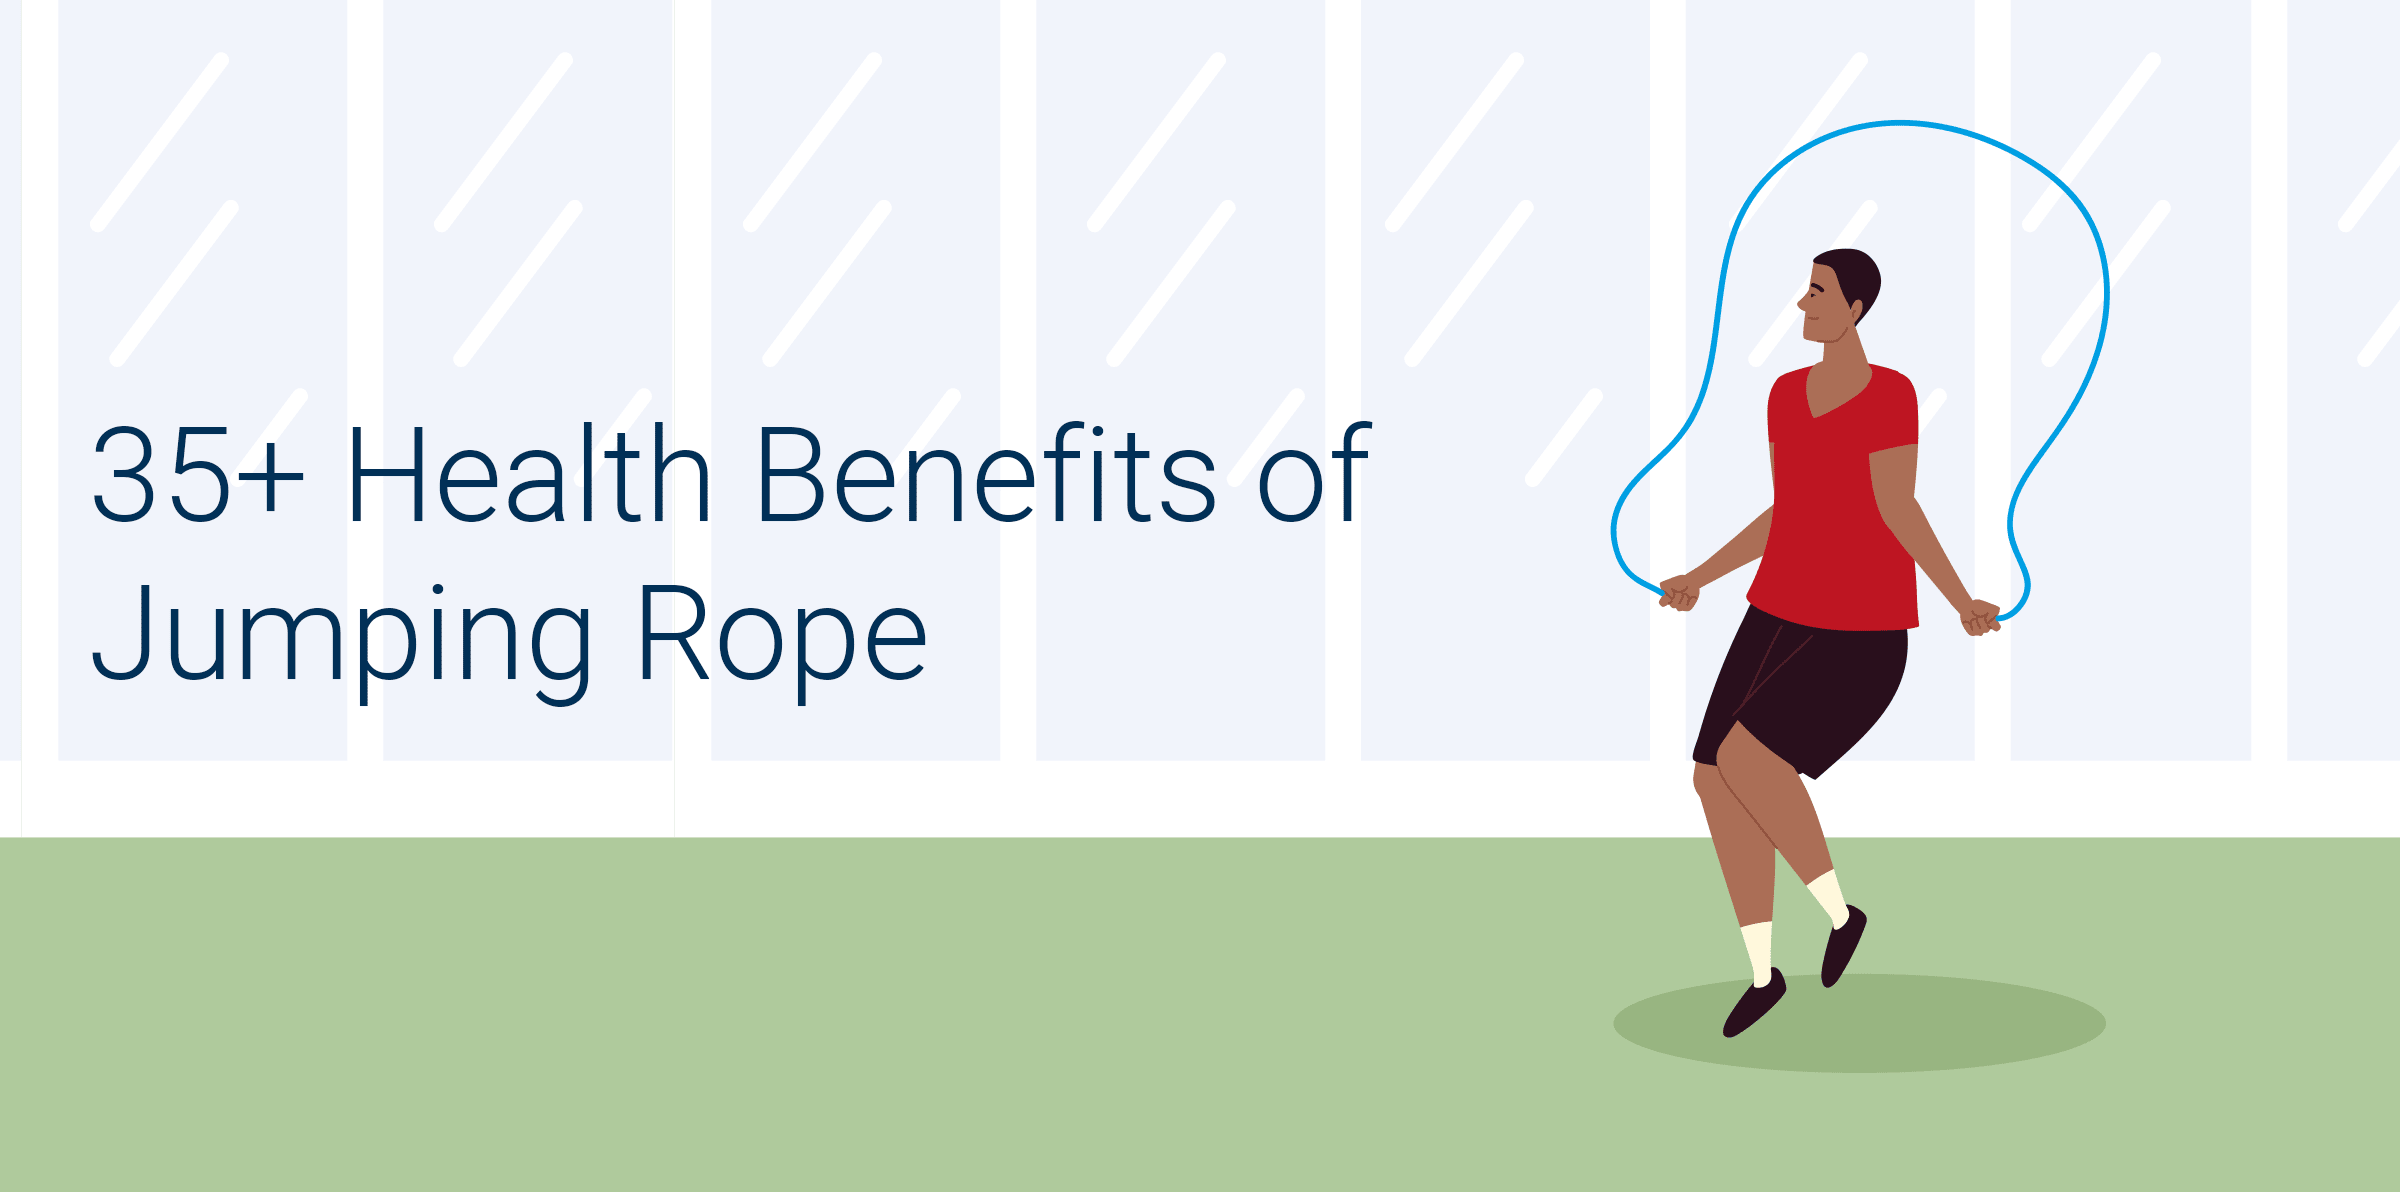 Jump rope benefits: 35+ health benefits of jumping rope